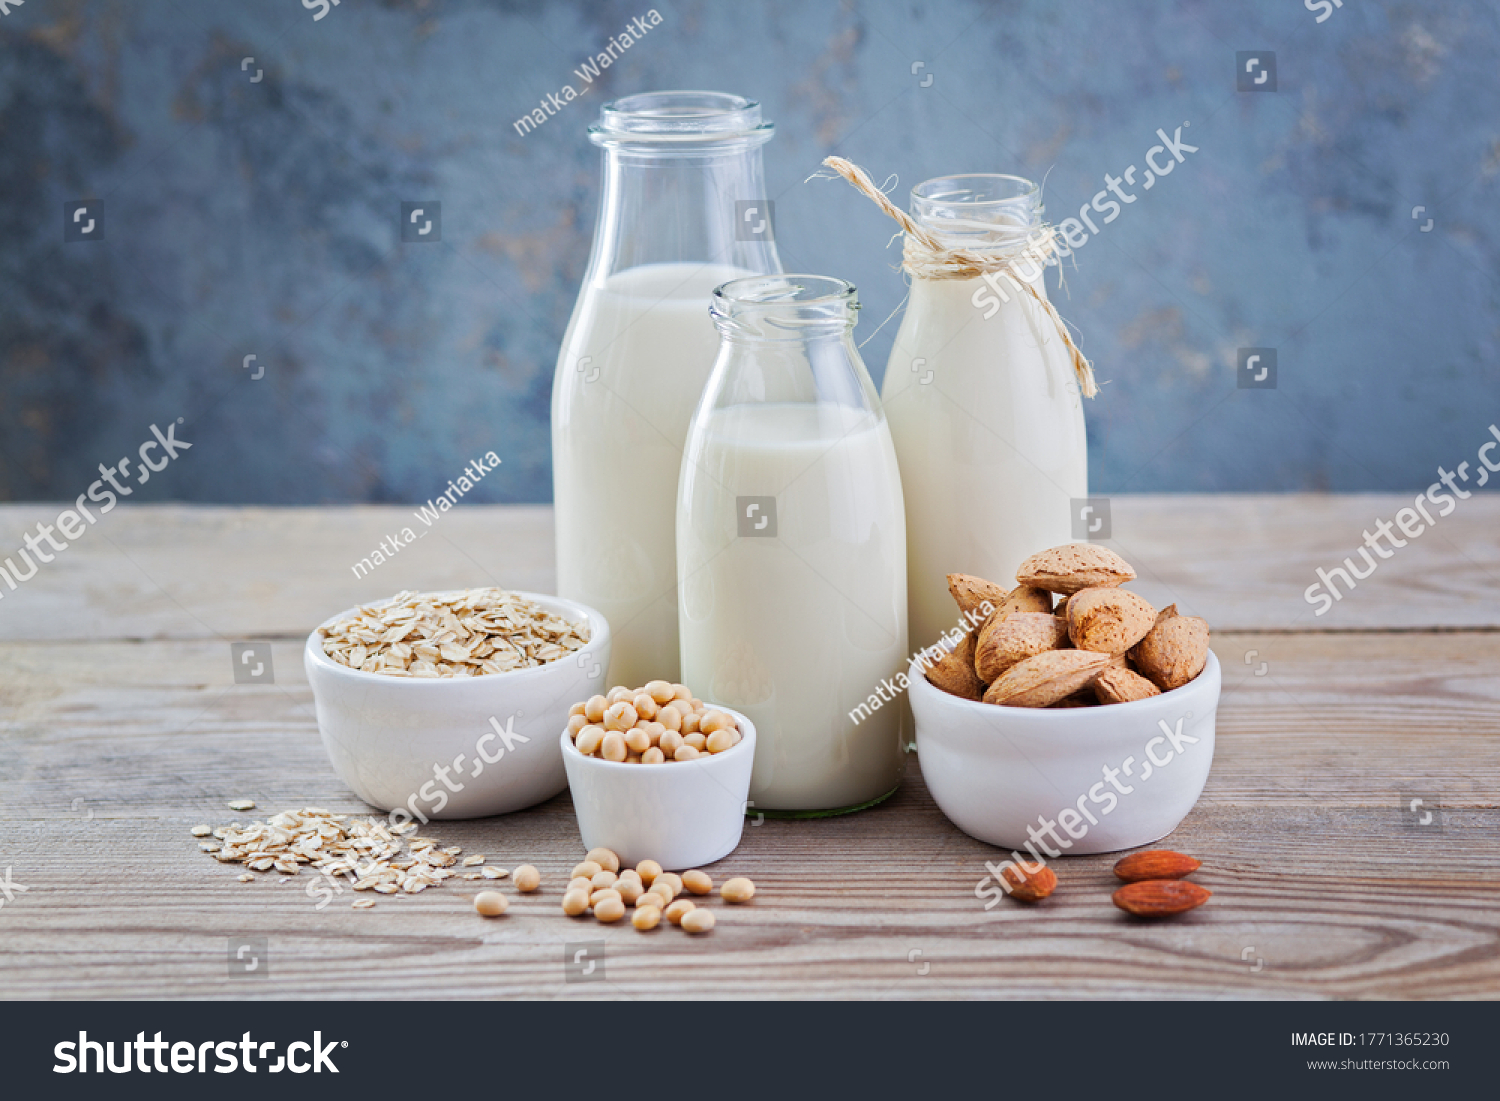 dairy free milk drink and ingredients for breakfast - food and drink #1771365230